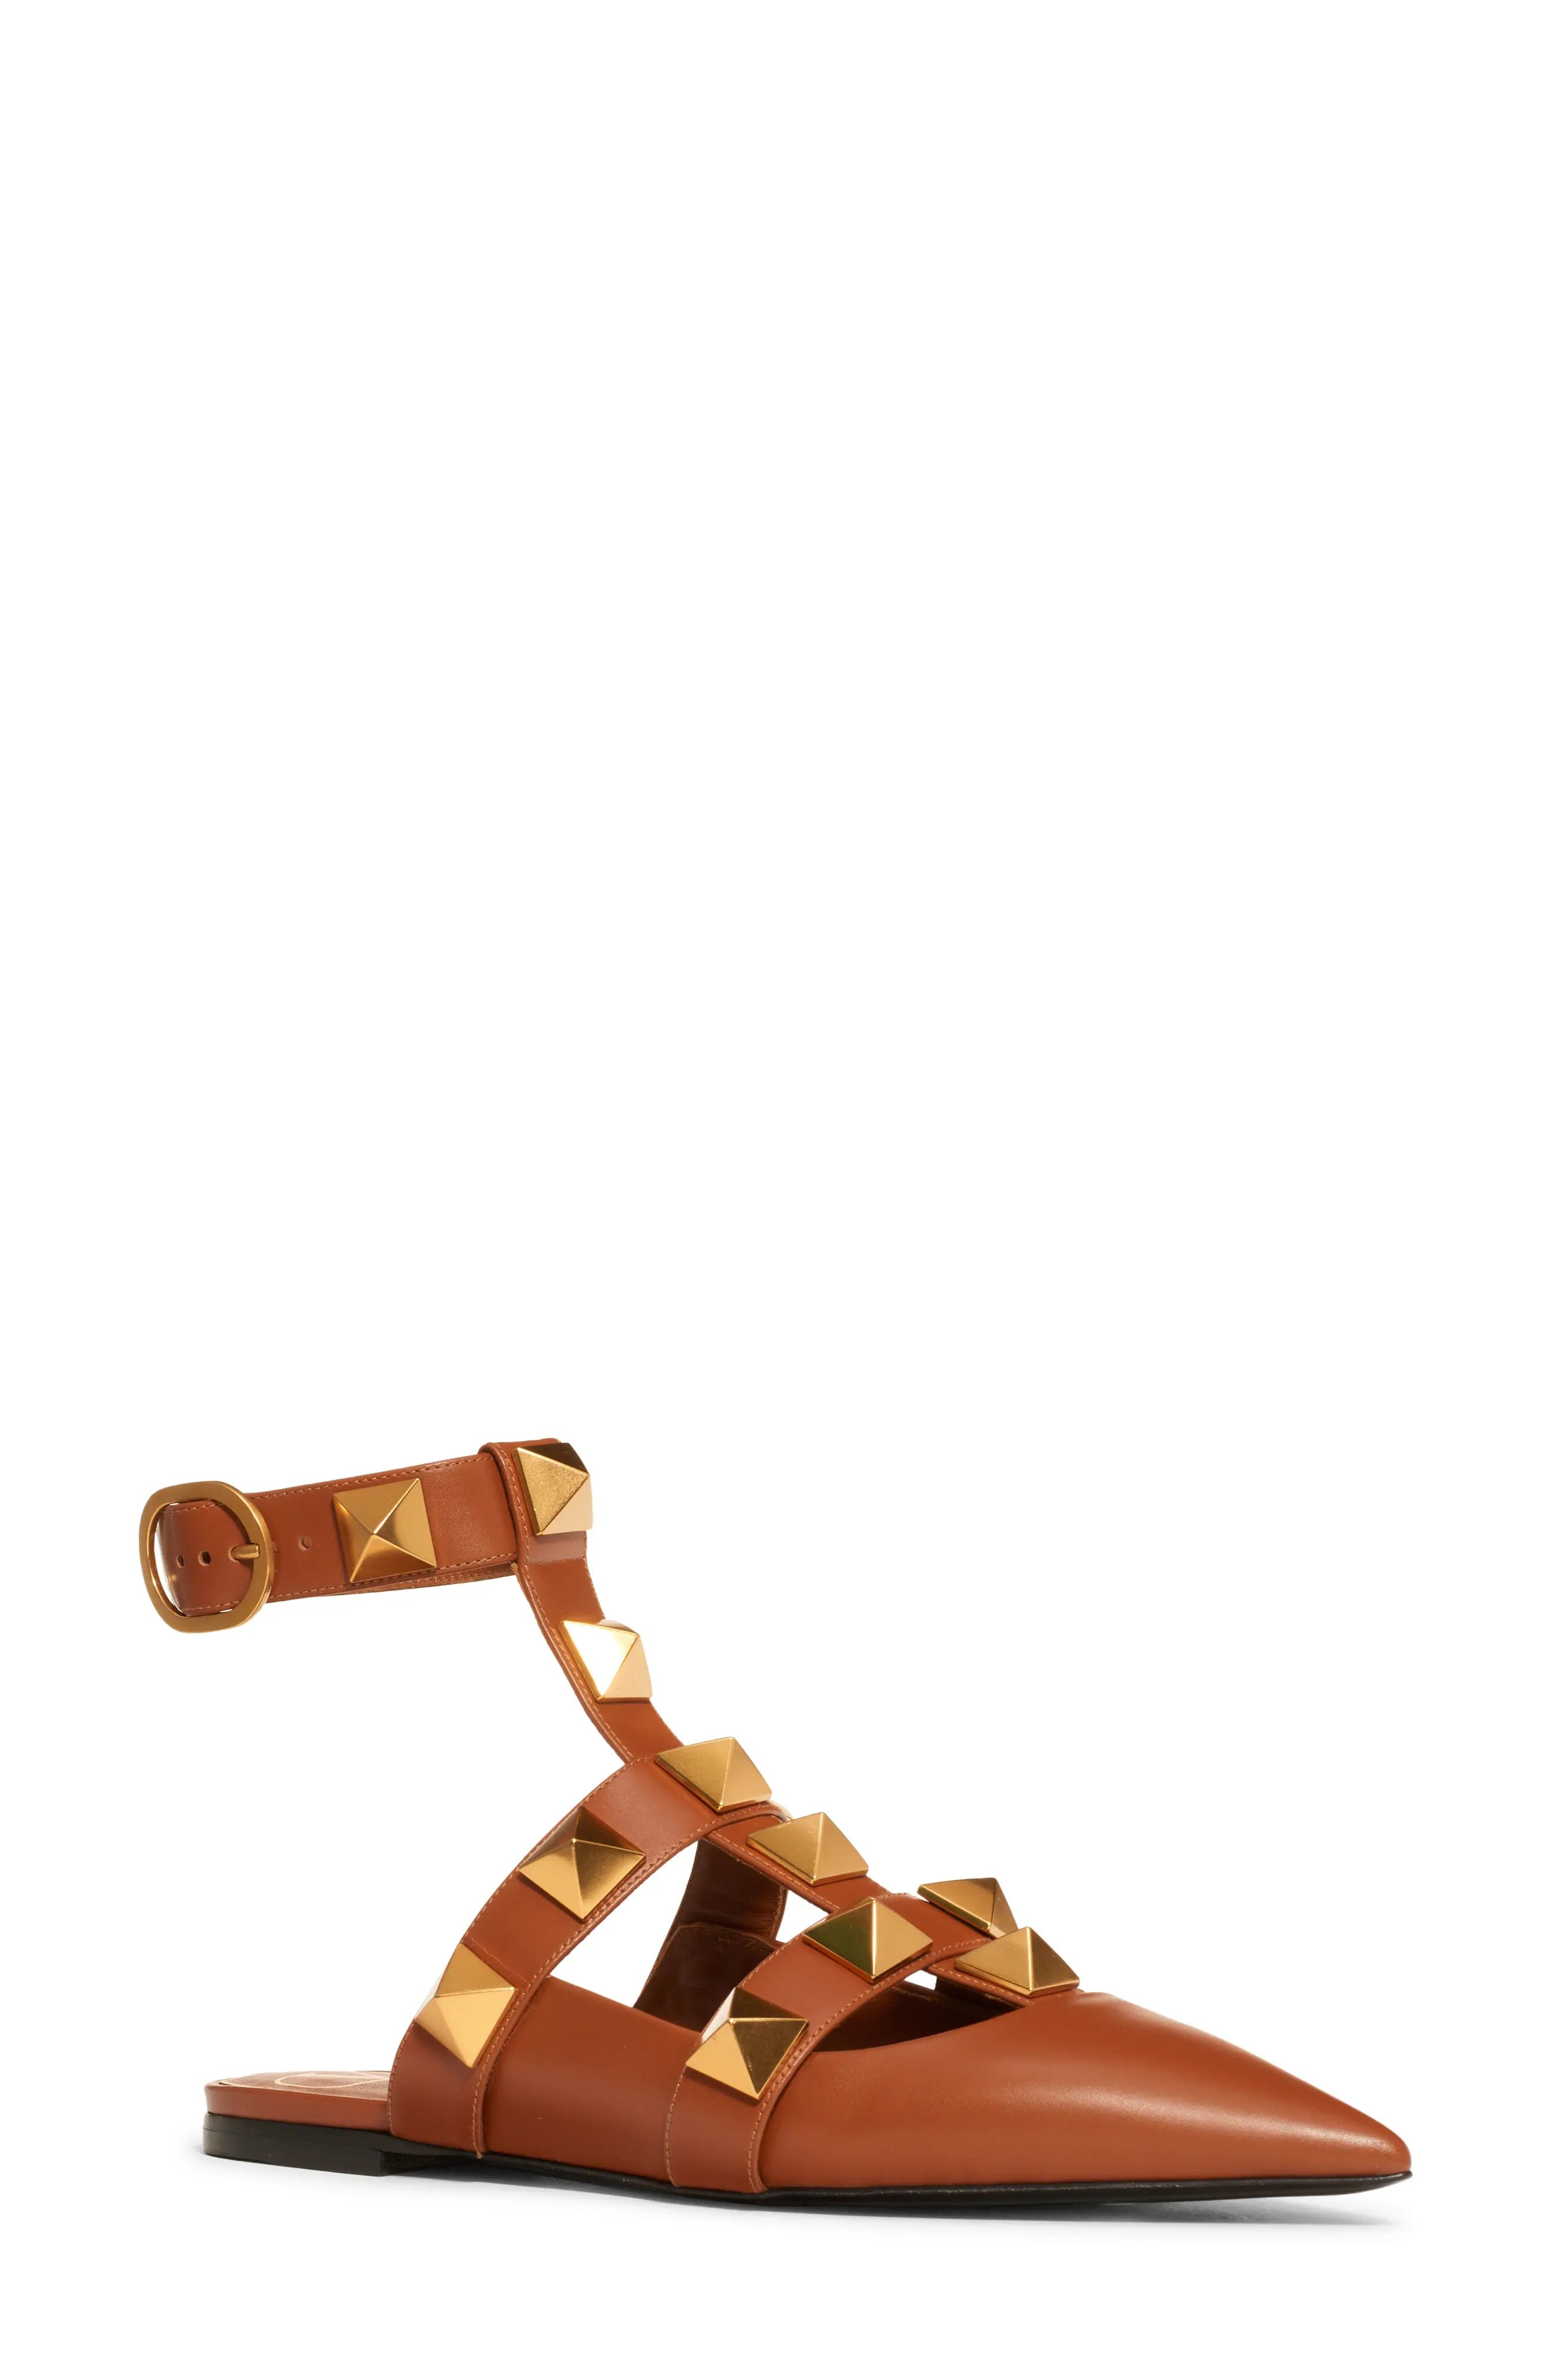 Women's Valentino Roman Stud Ankle Strap Flat, Size 6US - Brown | Nordstrom